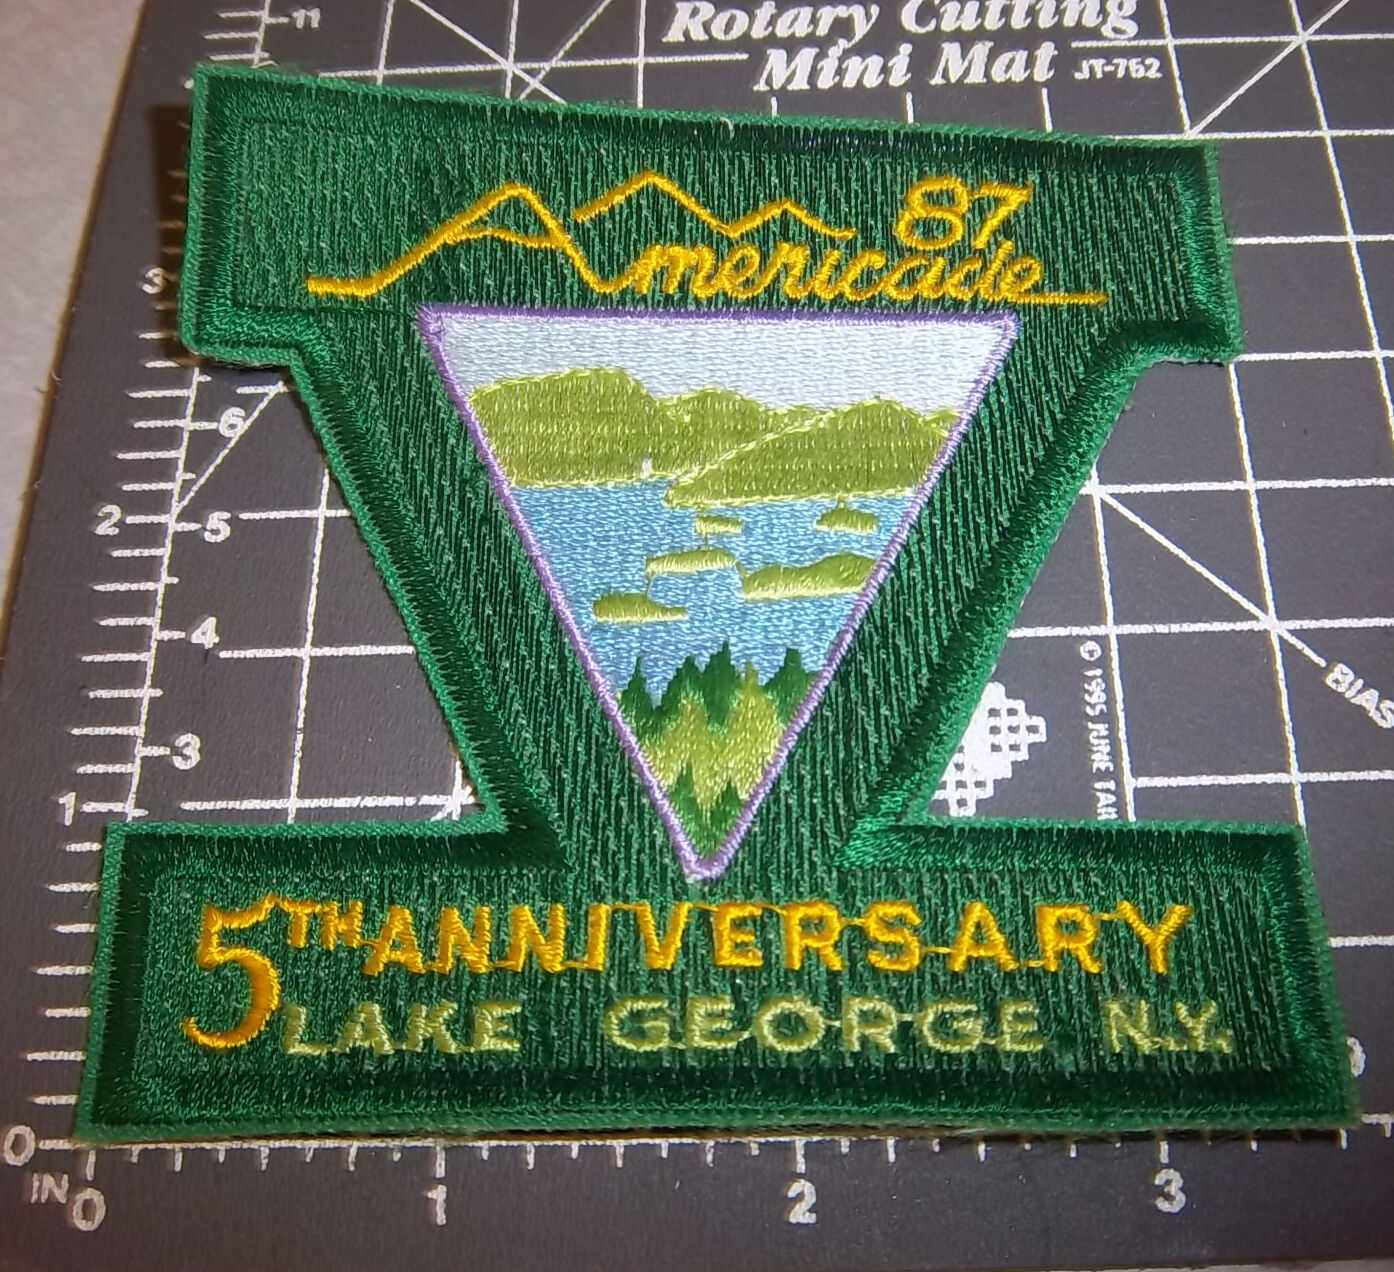 Americade 1987, Lake George New York, Embroidered Patch, great collectible